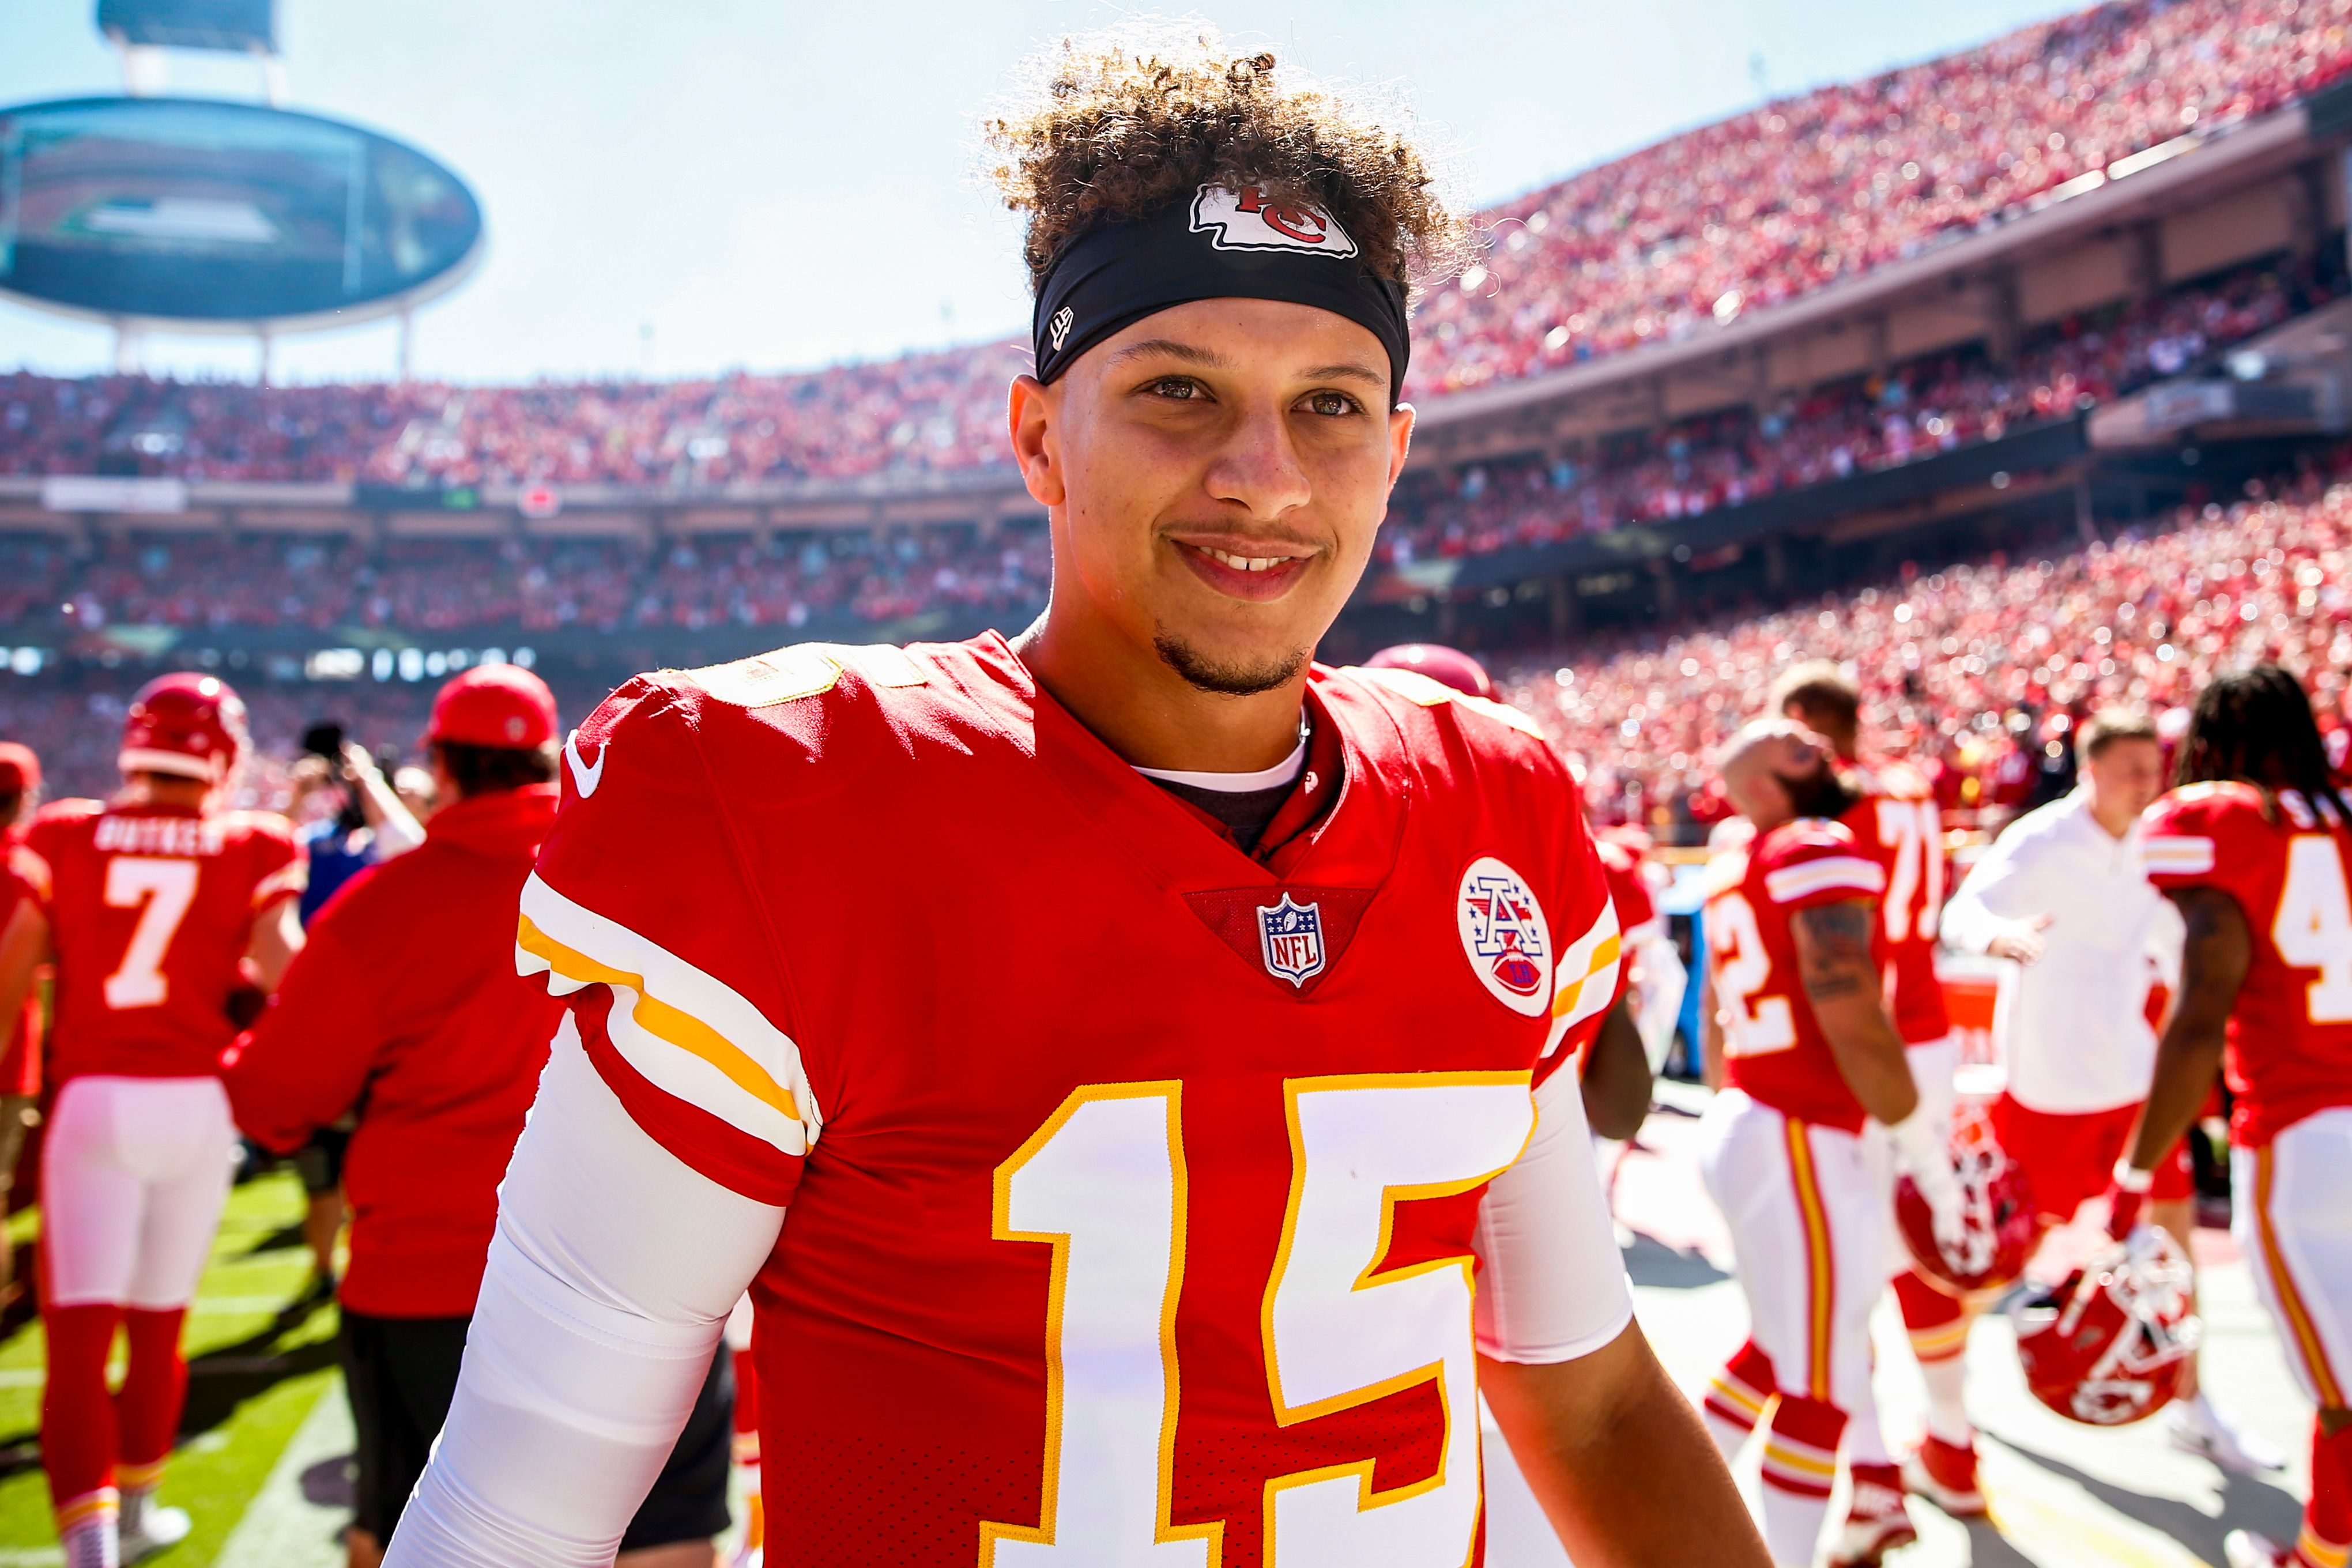 Patrick Mahomes plays against the San Francisco 49ers in 2018 in Kansas City | Source: Getty Images